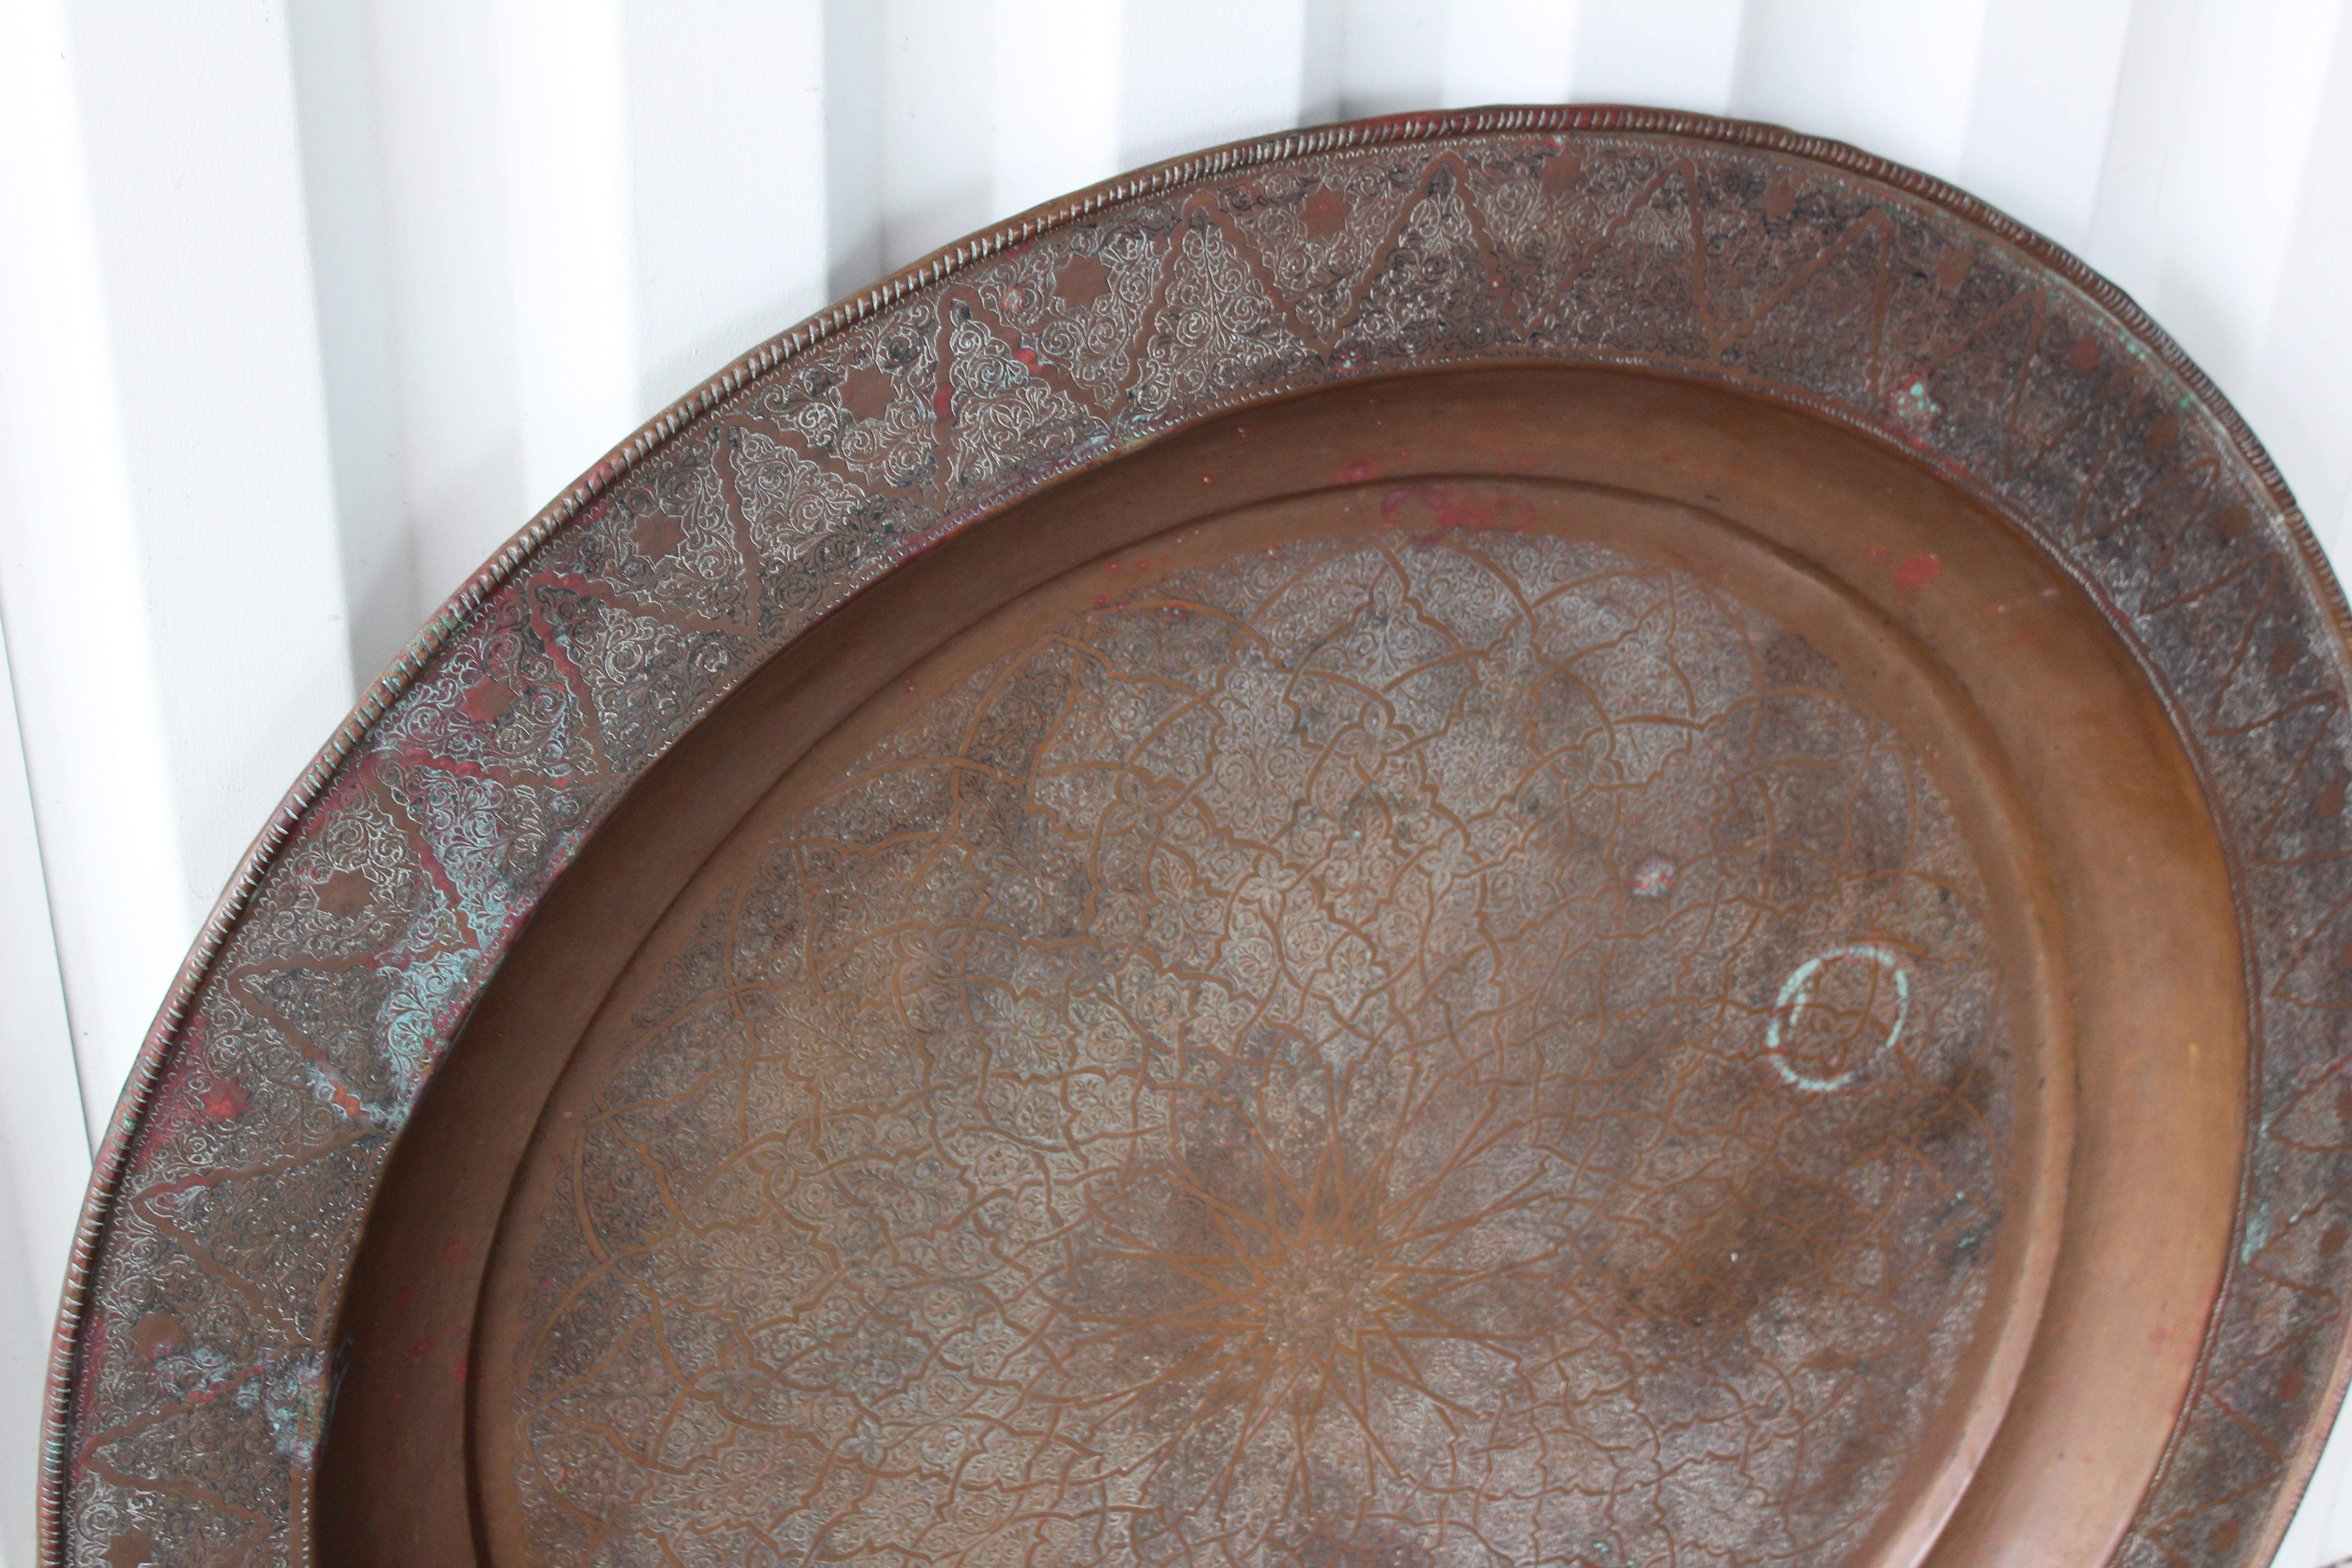 Vintage Moorish 19th century etched copper tray. Original condition with age appropriate wear. Shows verdigris patina.